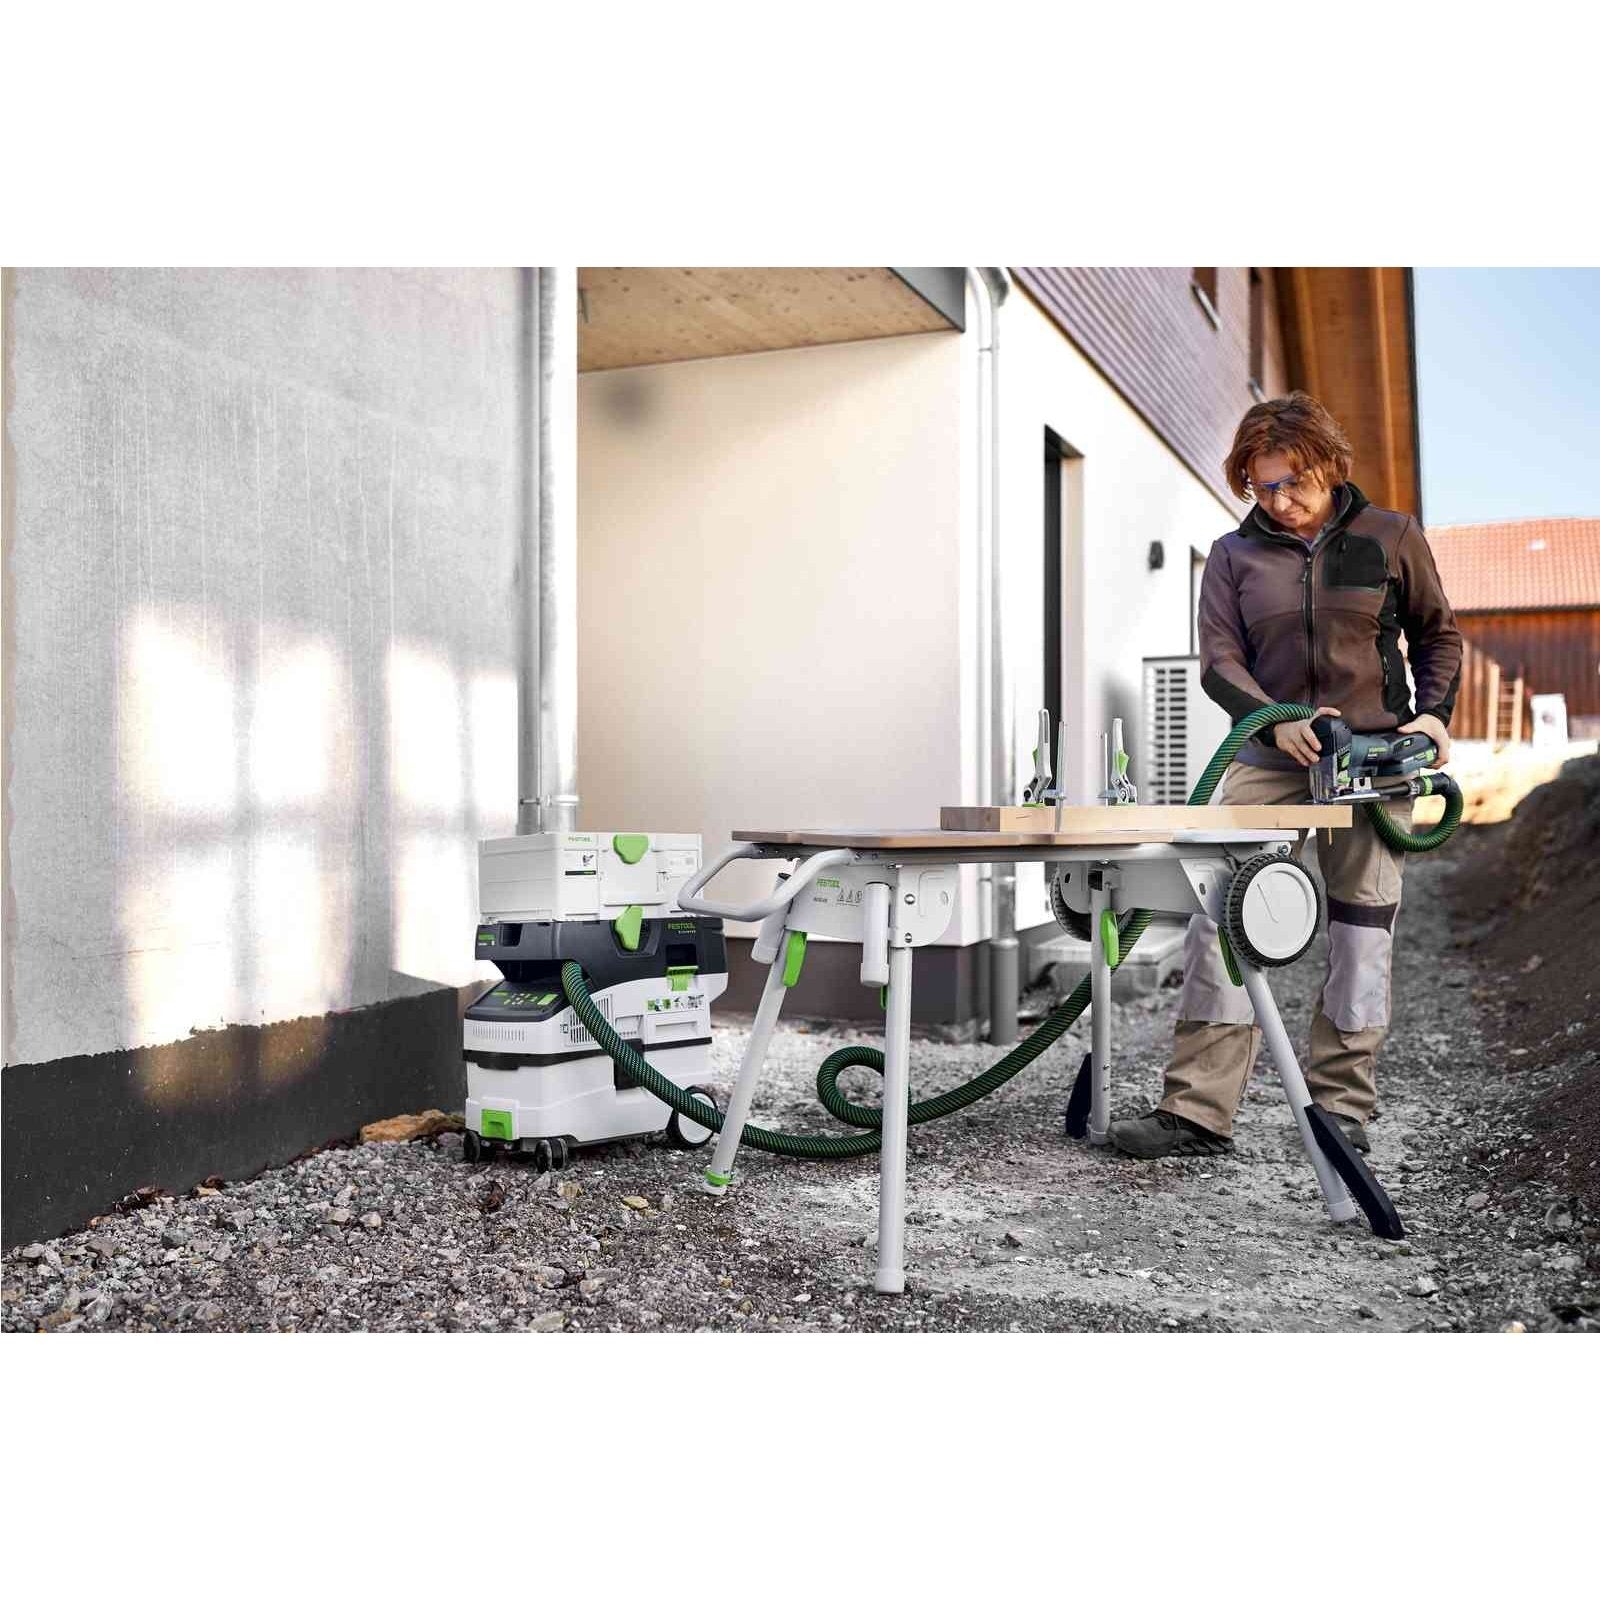 Festool Limited Cordless Track Saw and Jigsaw Combo Kit TSC 55 Plus PSC 420 tool-junction-nz